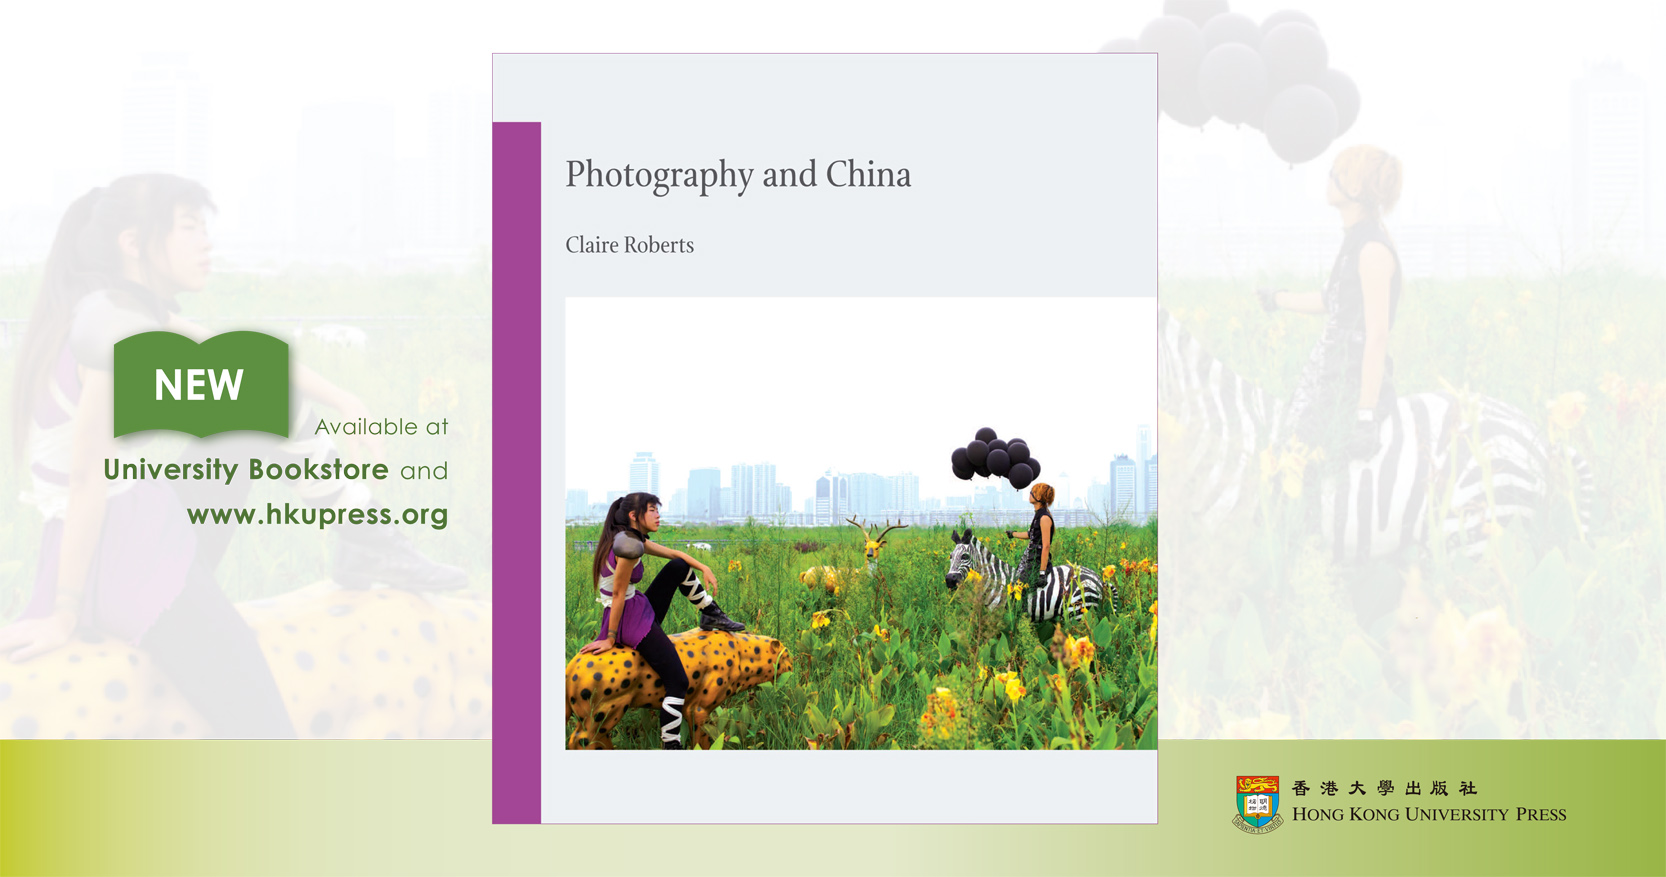 ...gathers over 130 images...find out more on www.hkupress.org